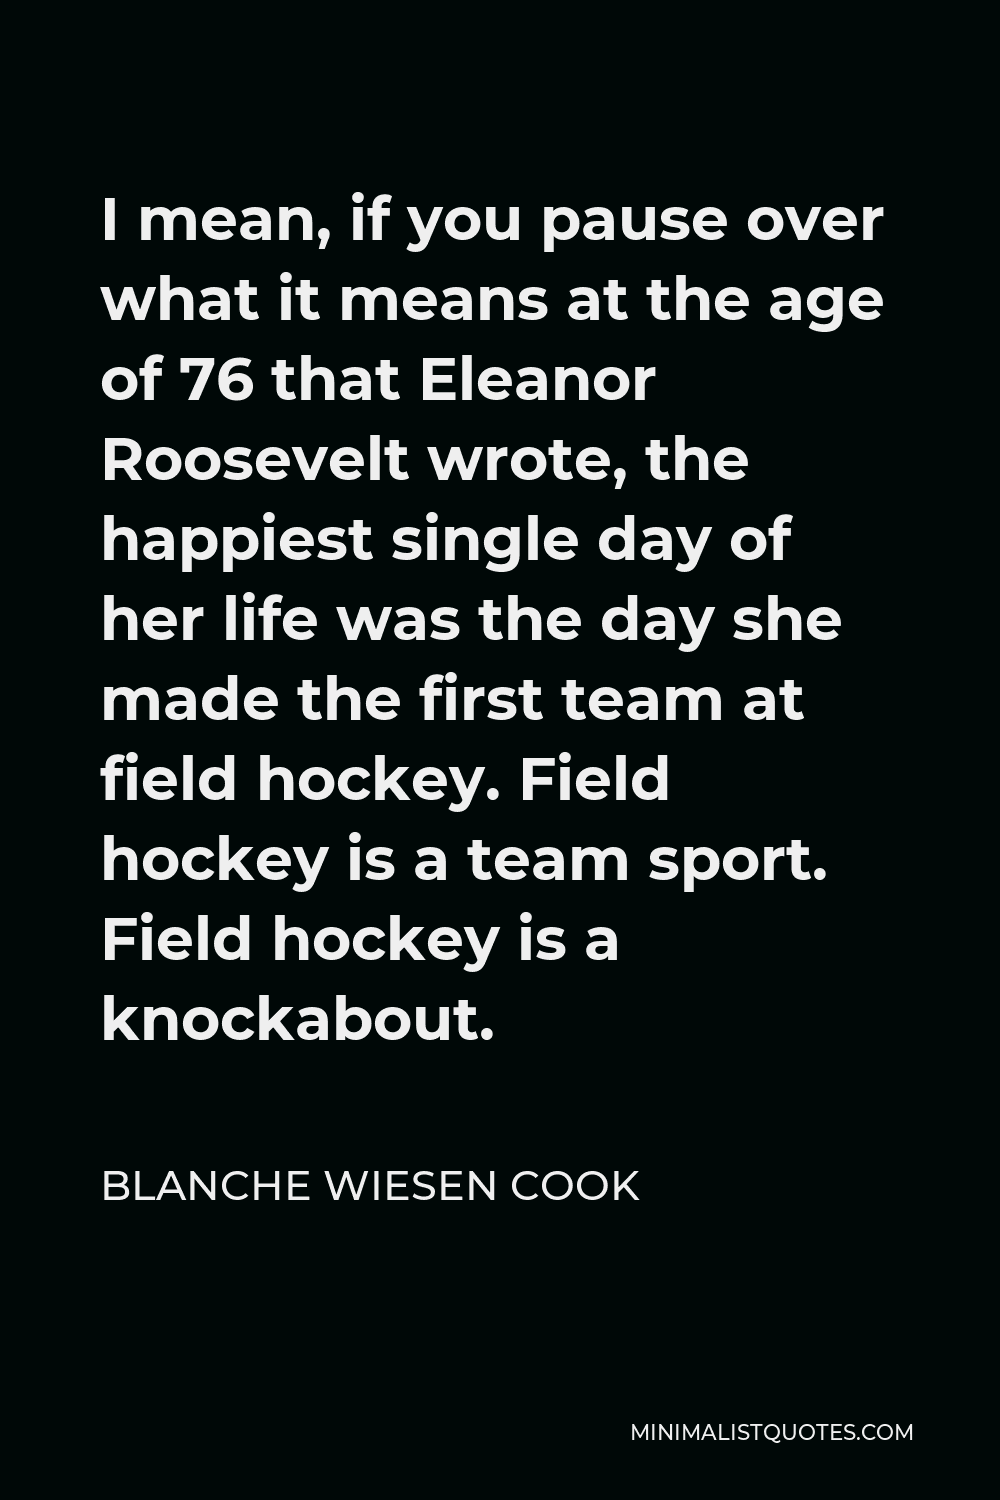 Blanche Wiesen Cook Quote - I mean, if you pause over what it means at the age of 76 that Eleanor Roosevelt wrote, the happiest single day of her life was the day she made the first team at field hockey. Field hockey is a team sport. Field hockey is a knockabout.